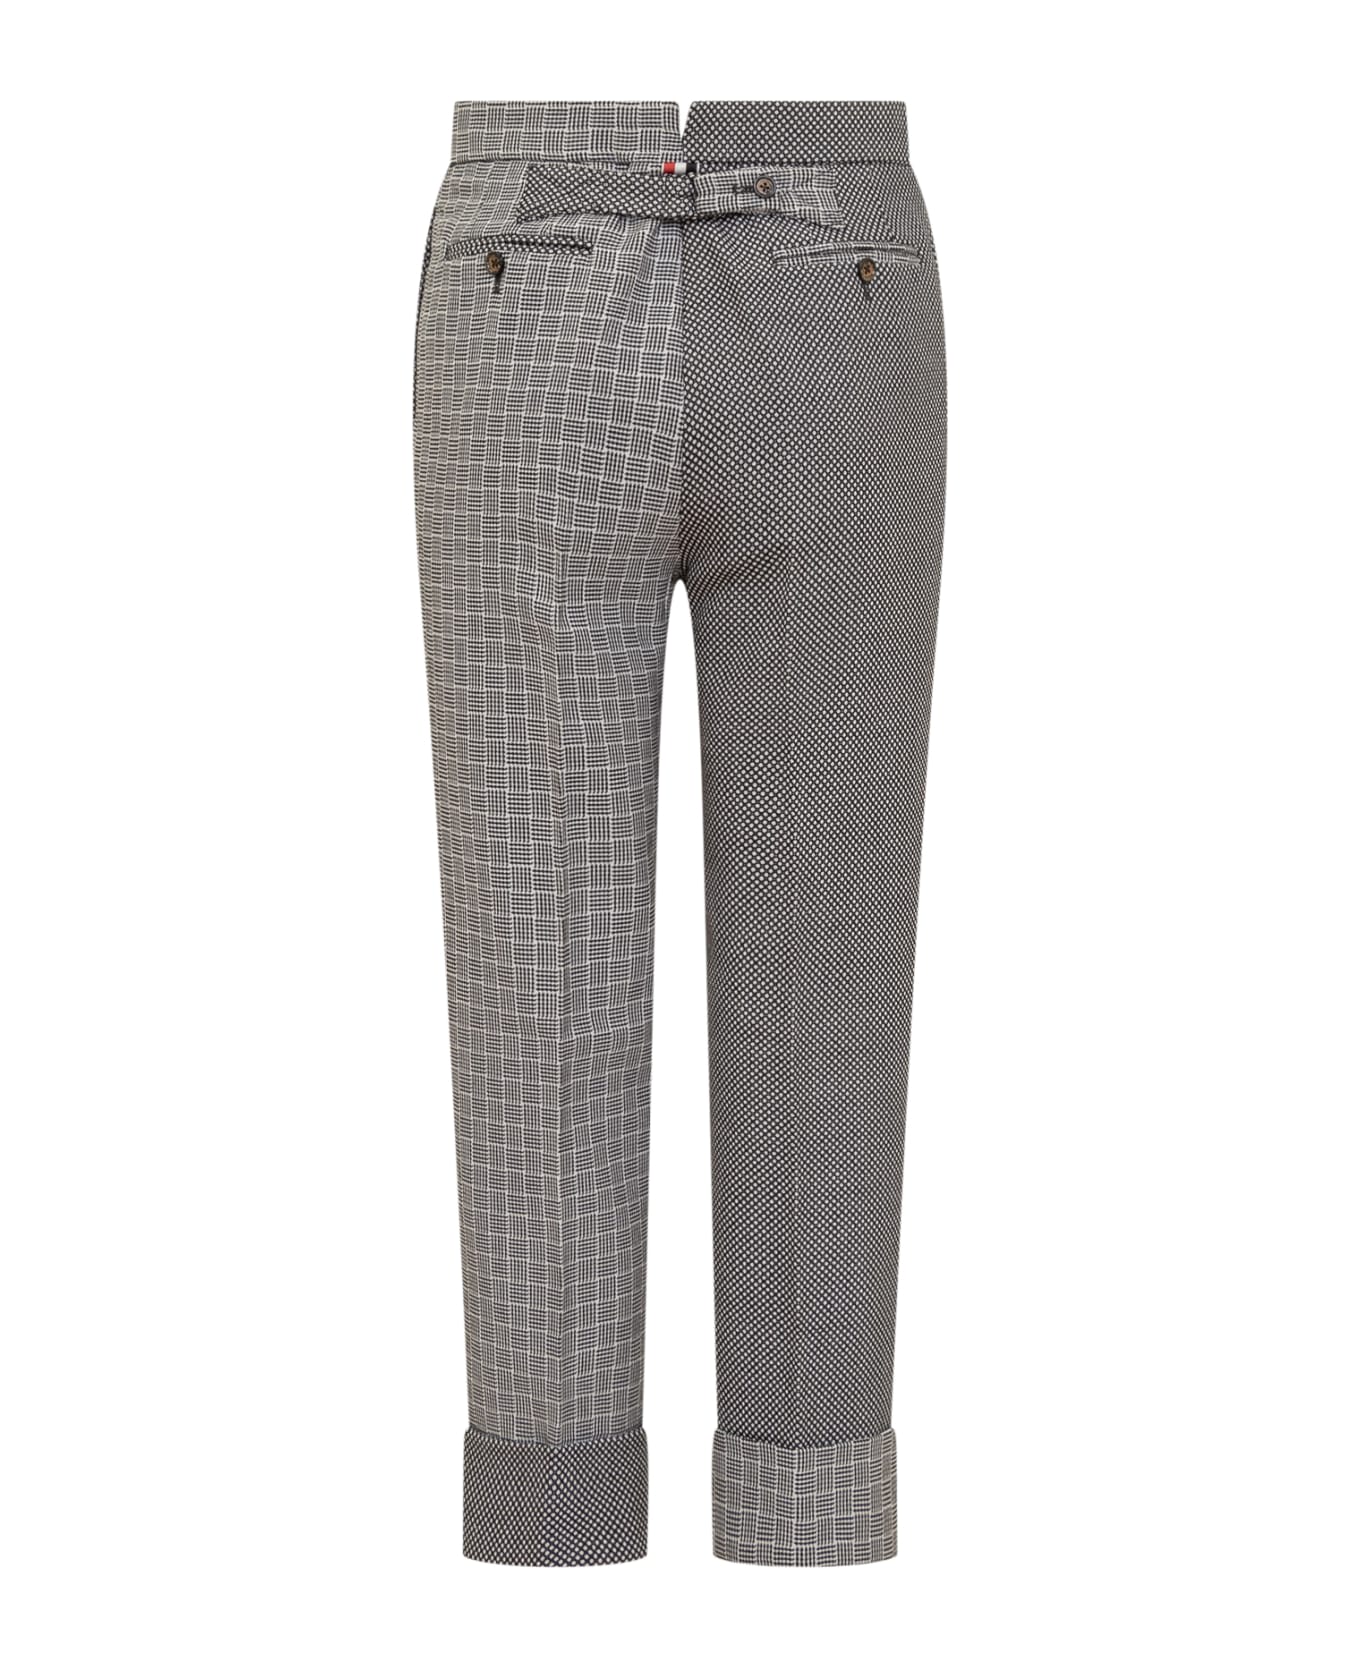 Thom Browne Classic Check Trousers - BLK/WHT ボトムス